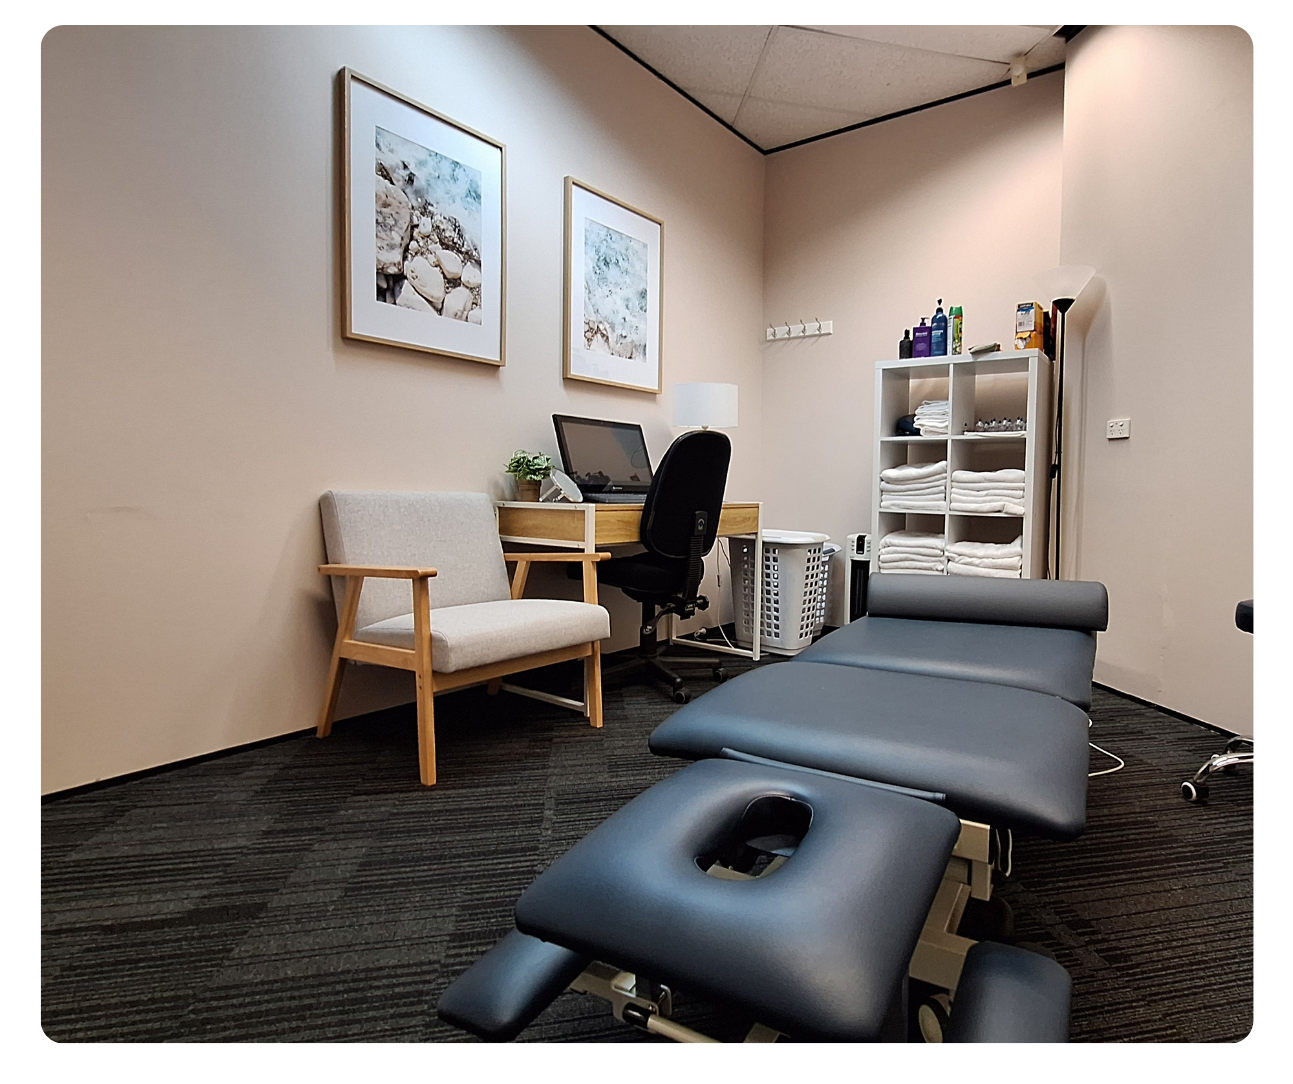 State-of-the-art facilities featuring advanced massage equipment and accessories.